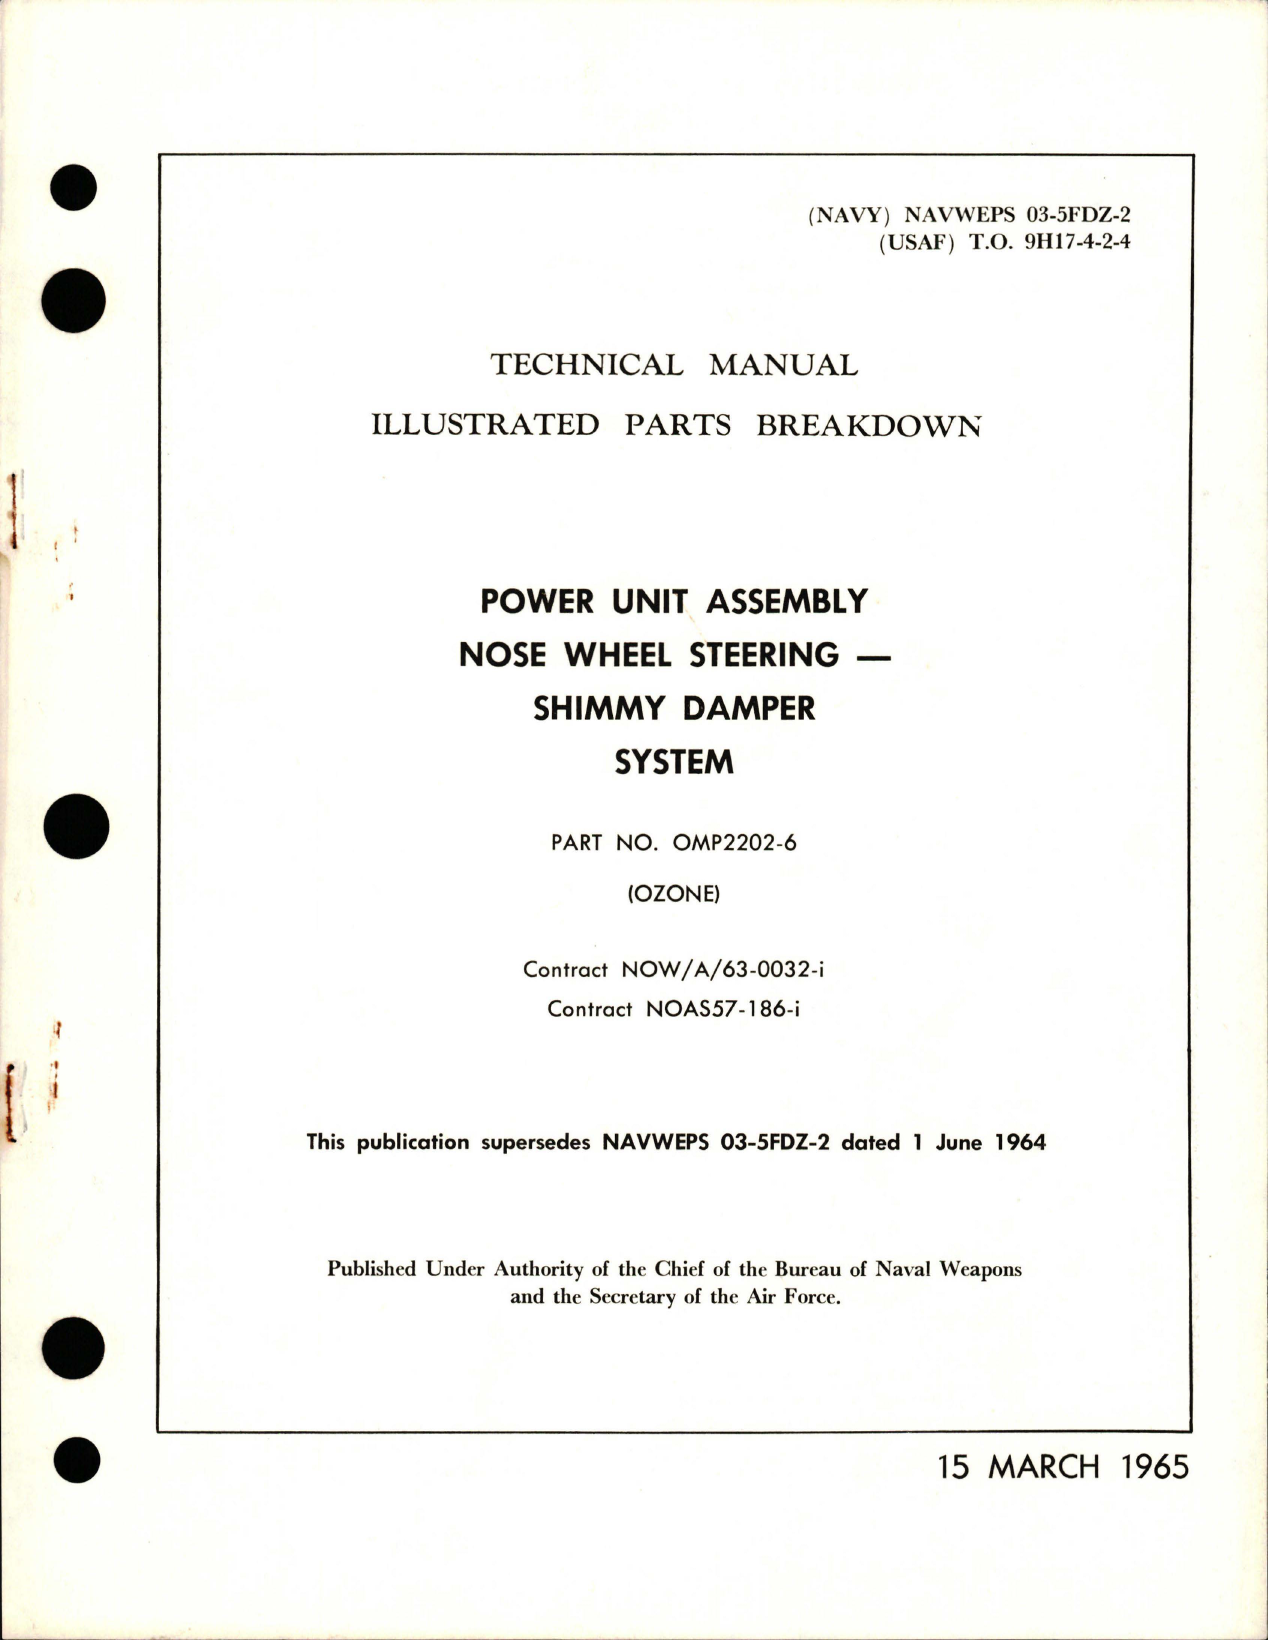 Sample page 1 from AirCorps Library document: Illustrated Parts Breakdown for Power Unit Assembly, Nose Wheel Steering Shimmy Damper System - Part OMP2202-6